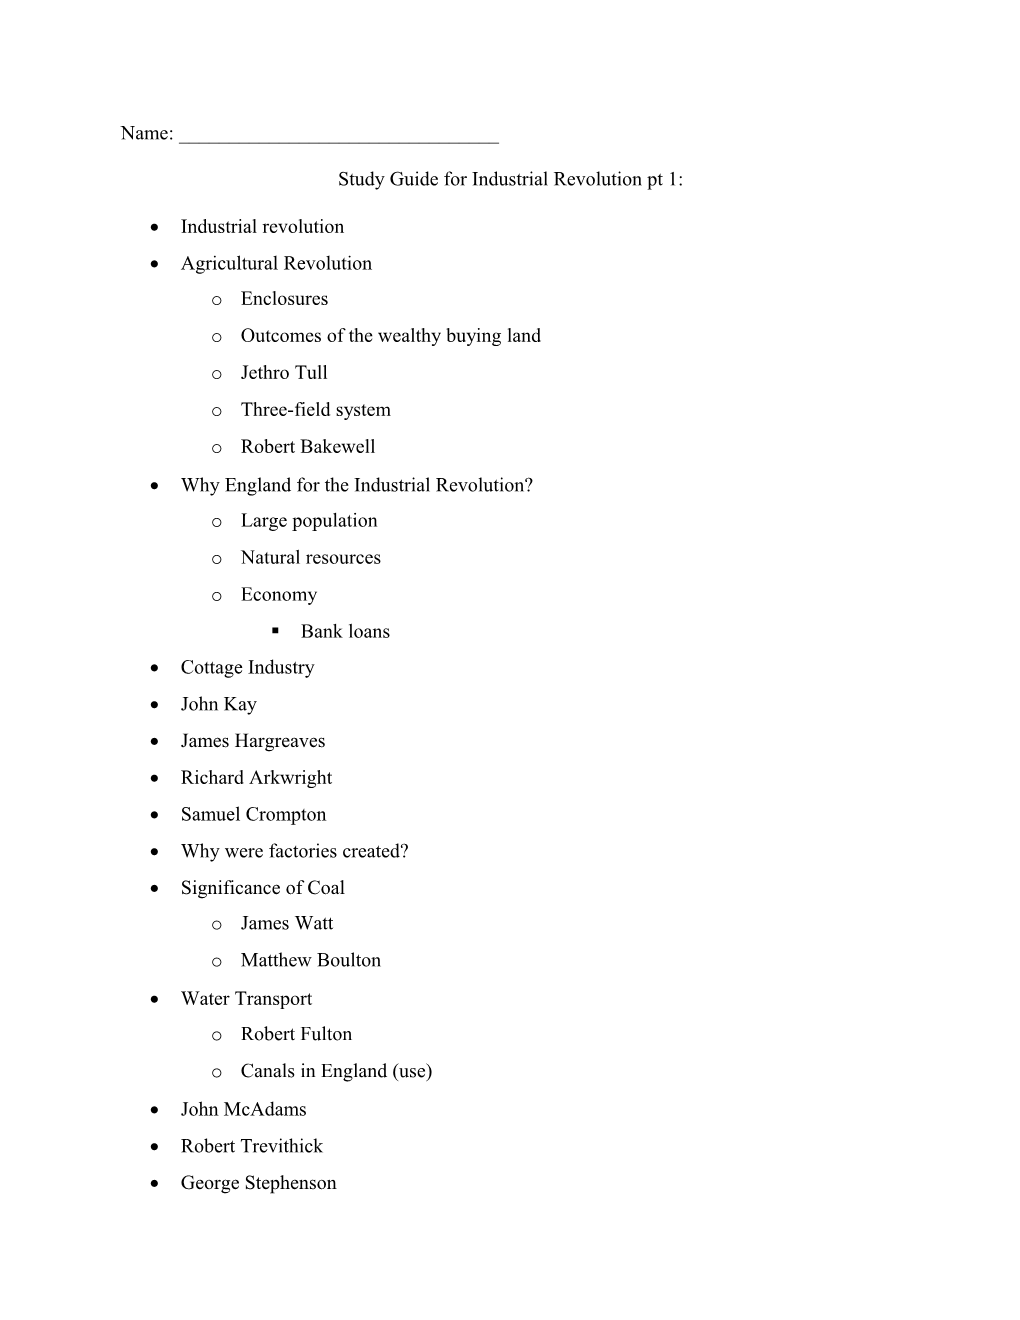 Study Guide for Industrial Revolution Pt 1